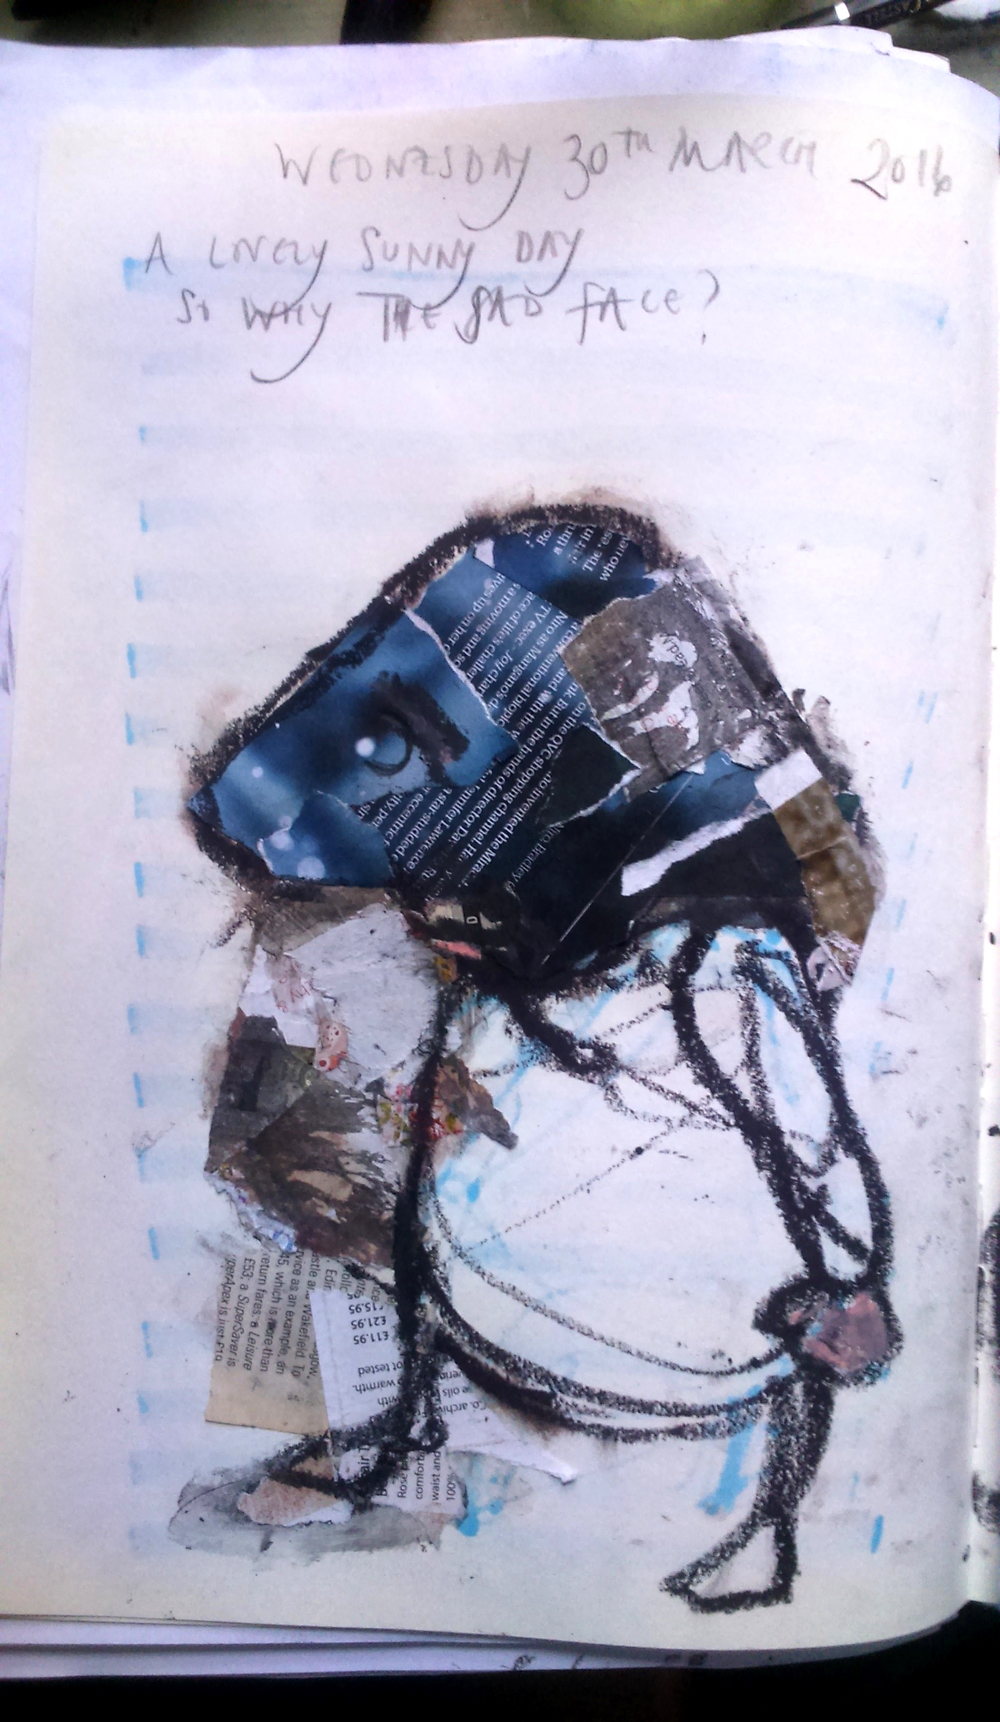 August Creative Challenge: Conveying emotions through colour and distortion: use of appropriately coloured collaged pieces and oversized head to convey weight of feelings. From Morag’s daily visual diary 2016